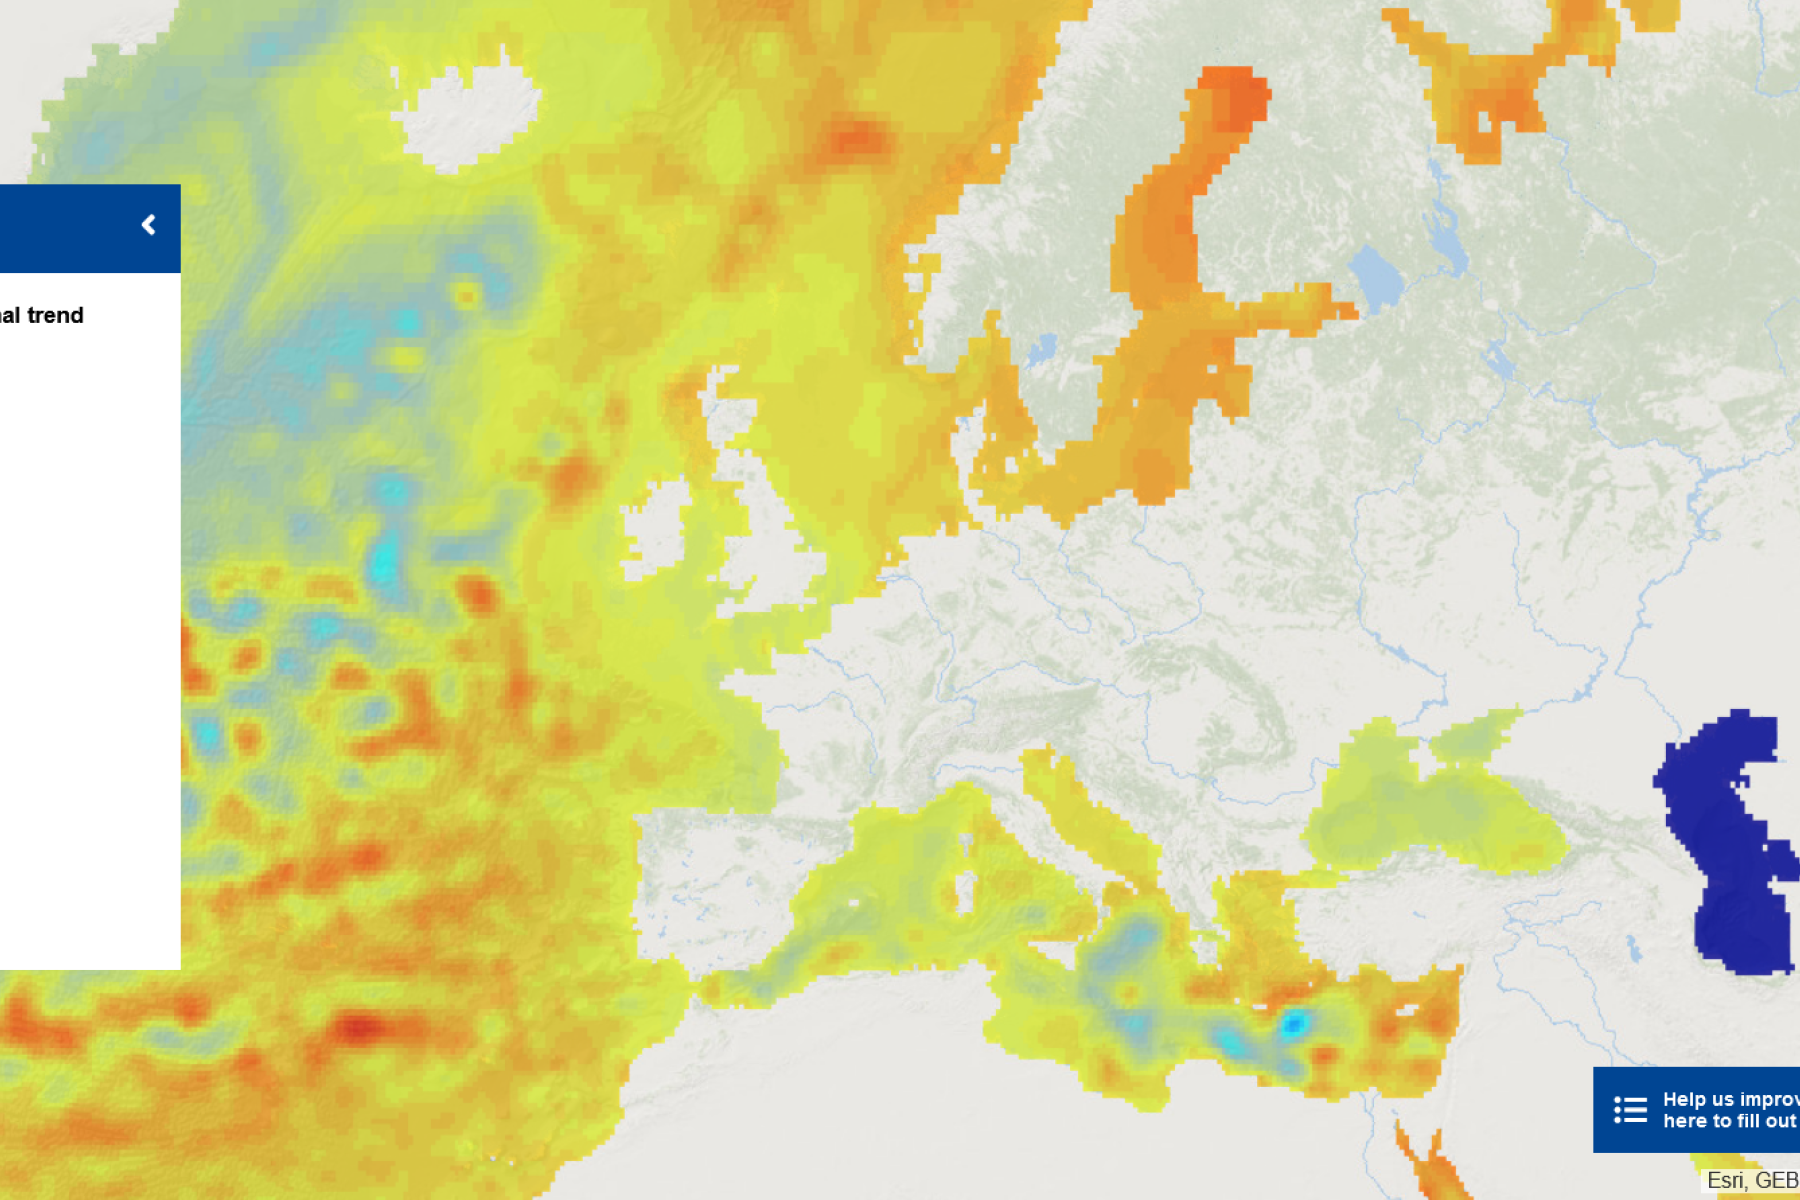 The map shows the spatial distribution of sea level trends since 1993.